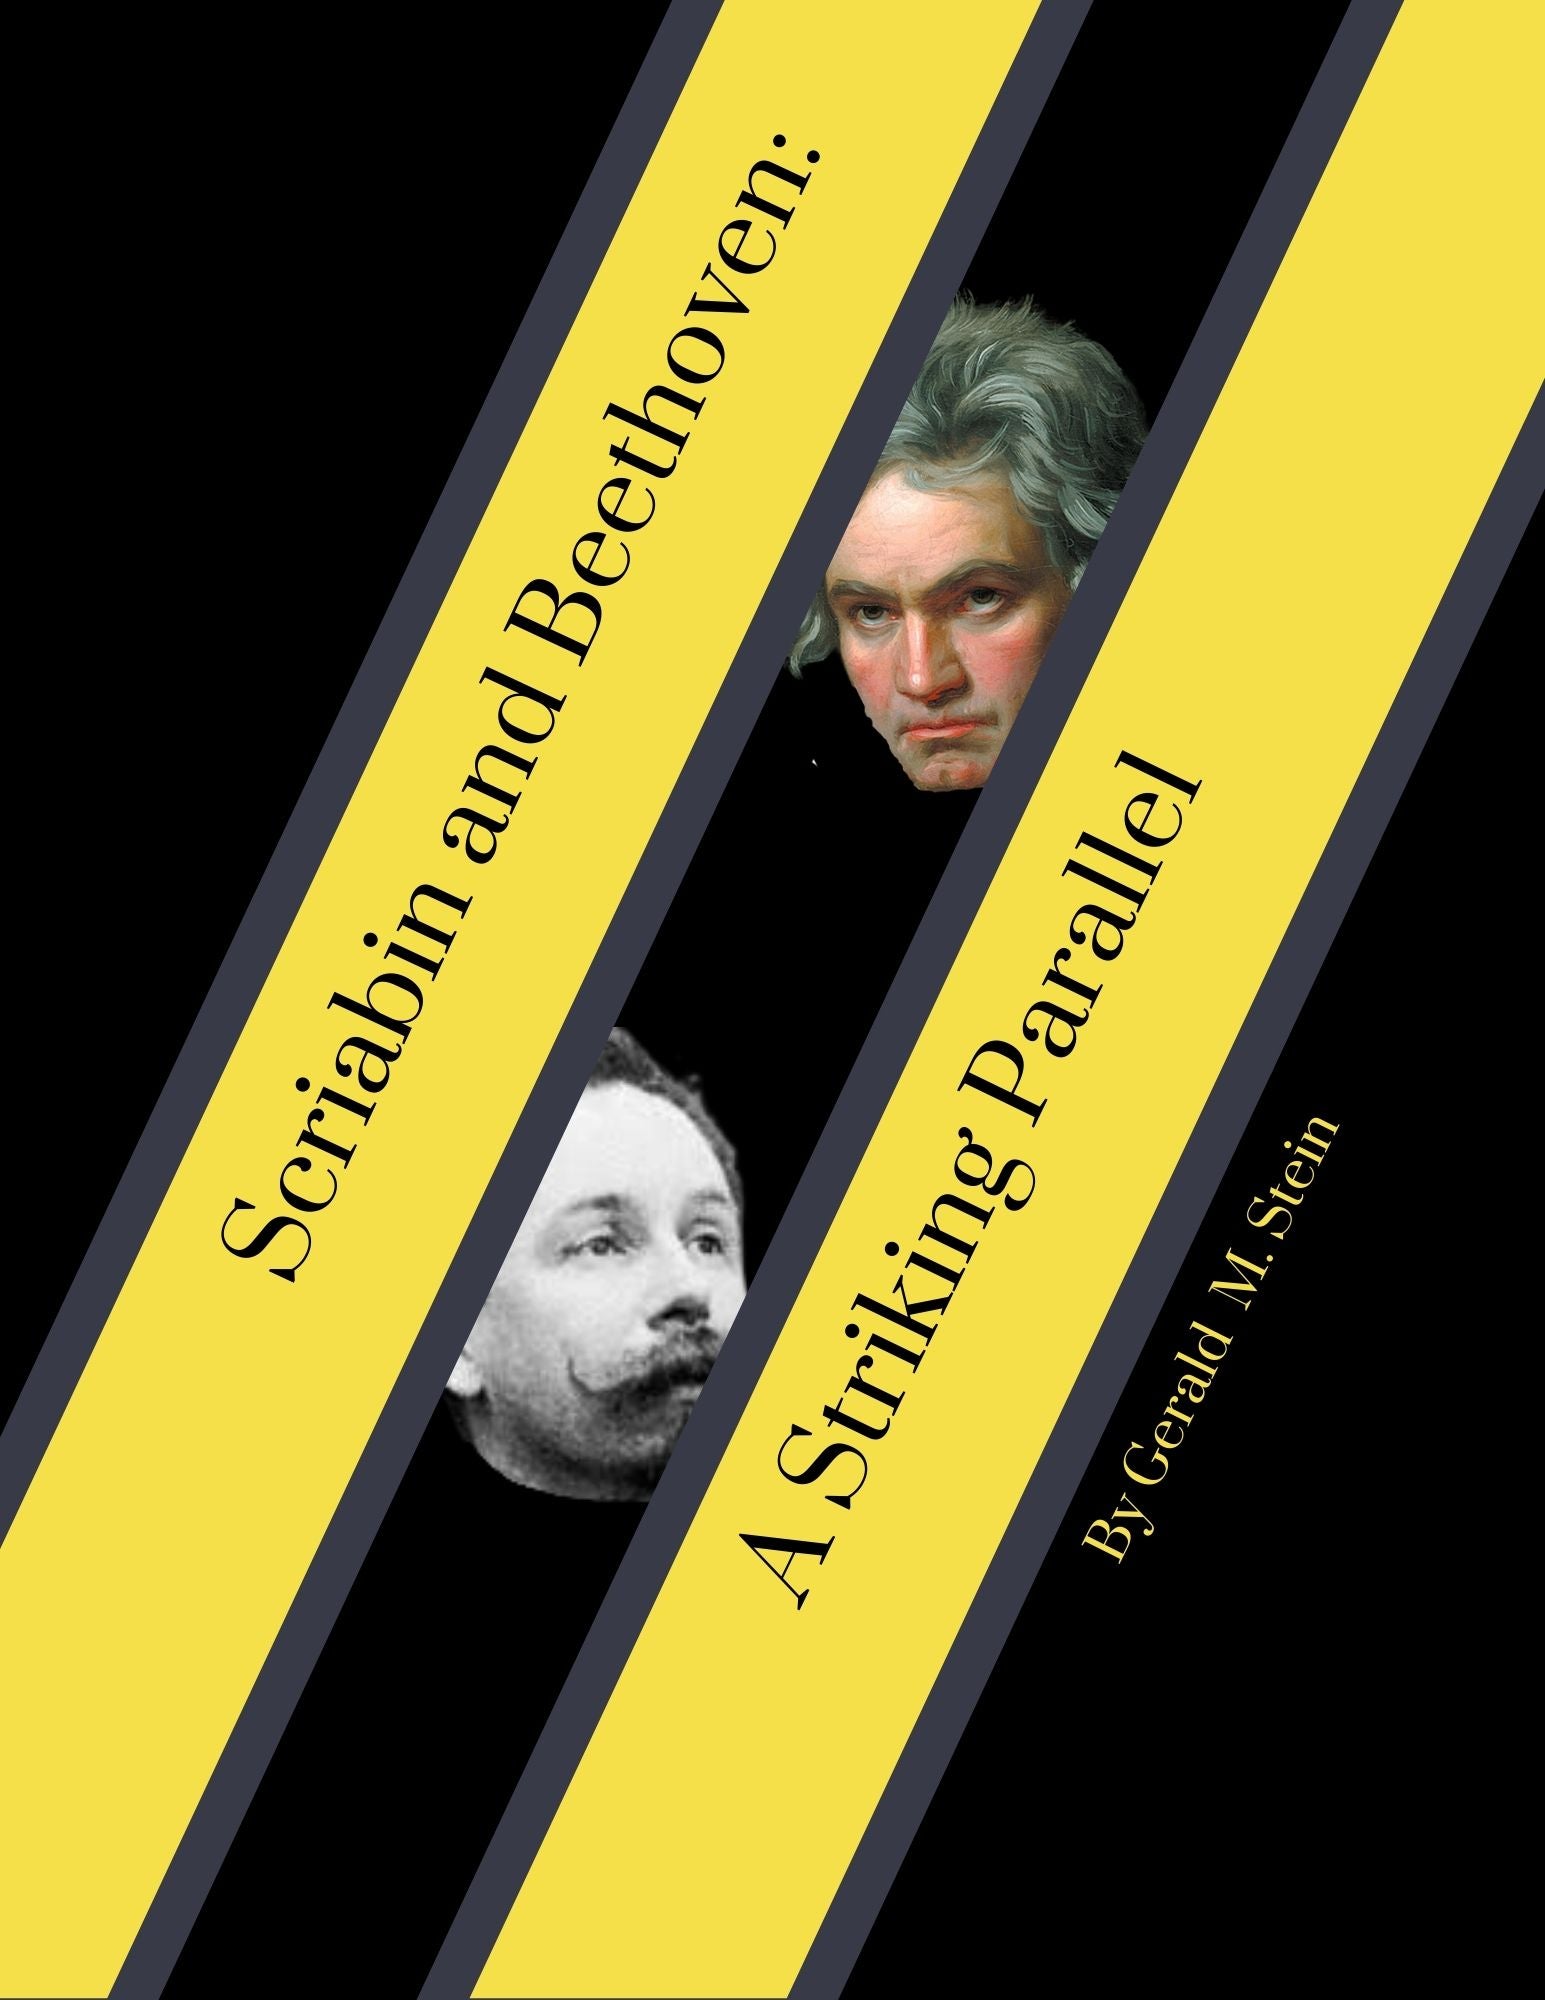 ESSAY: Scriabin and Beethoven - A Striking Parallel